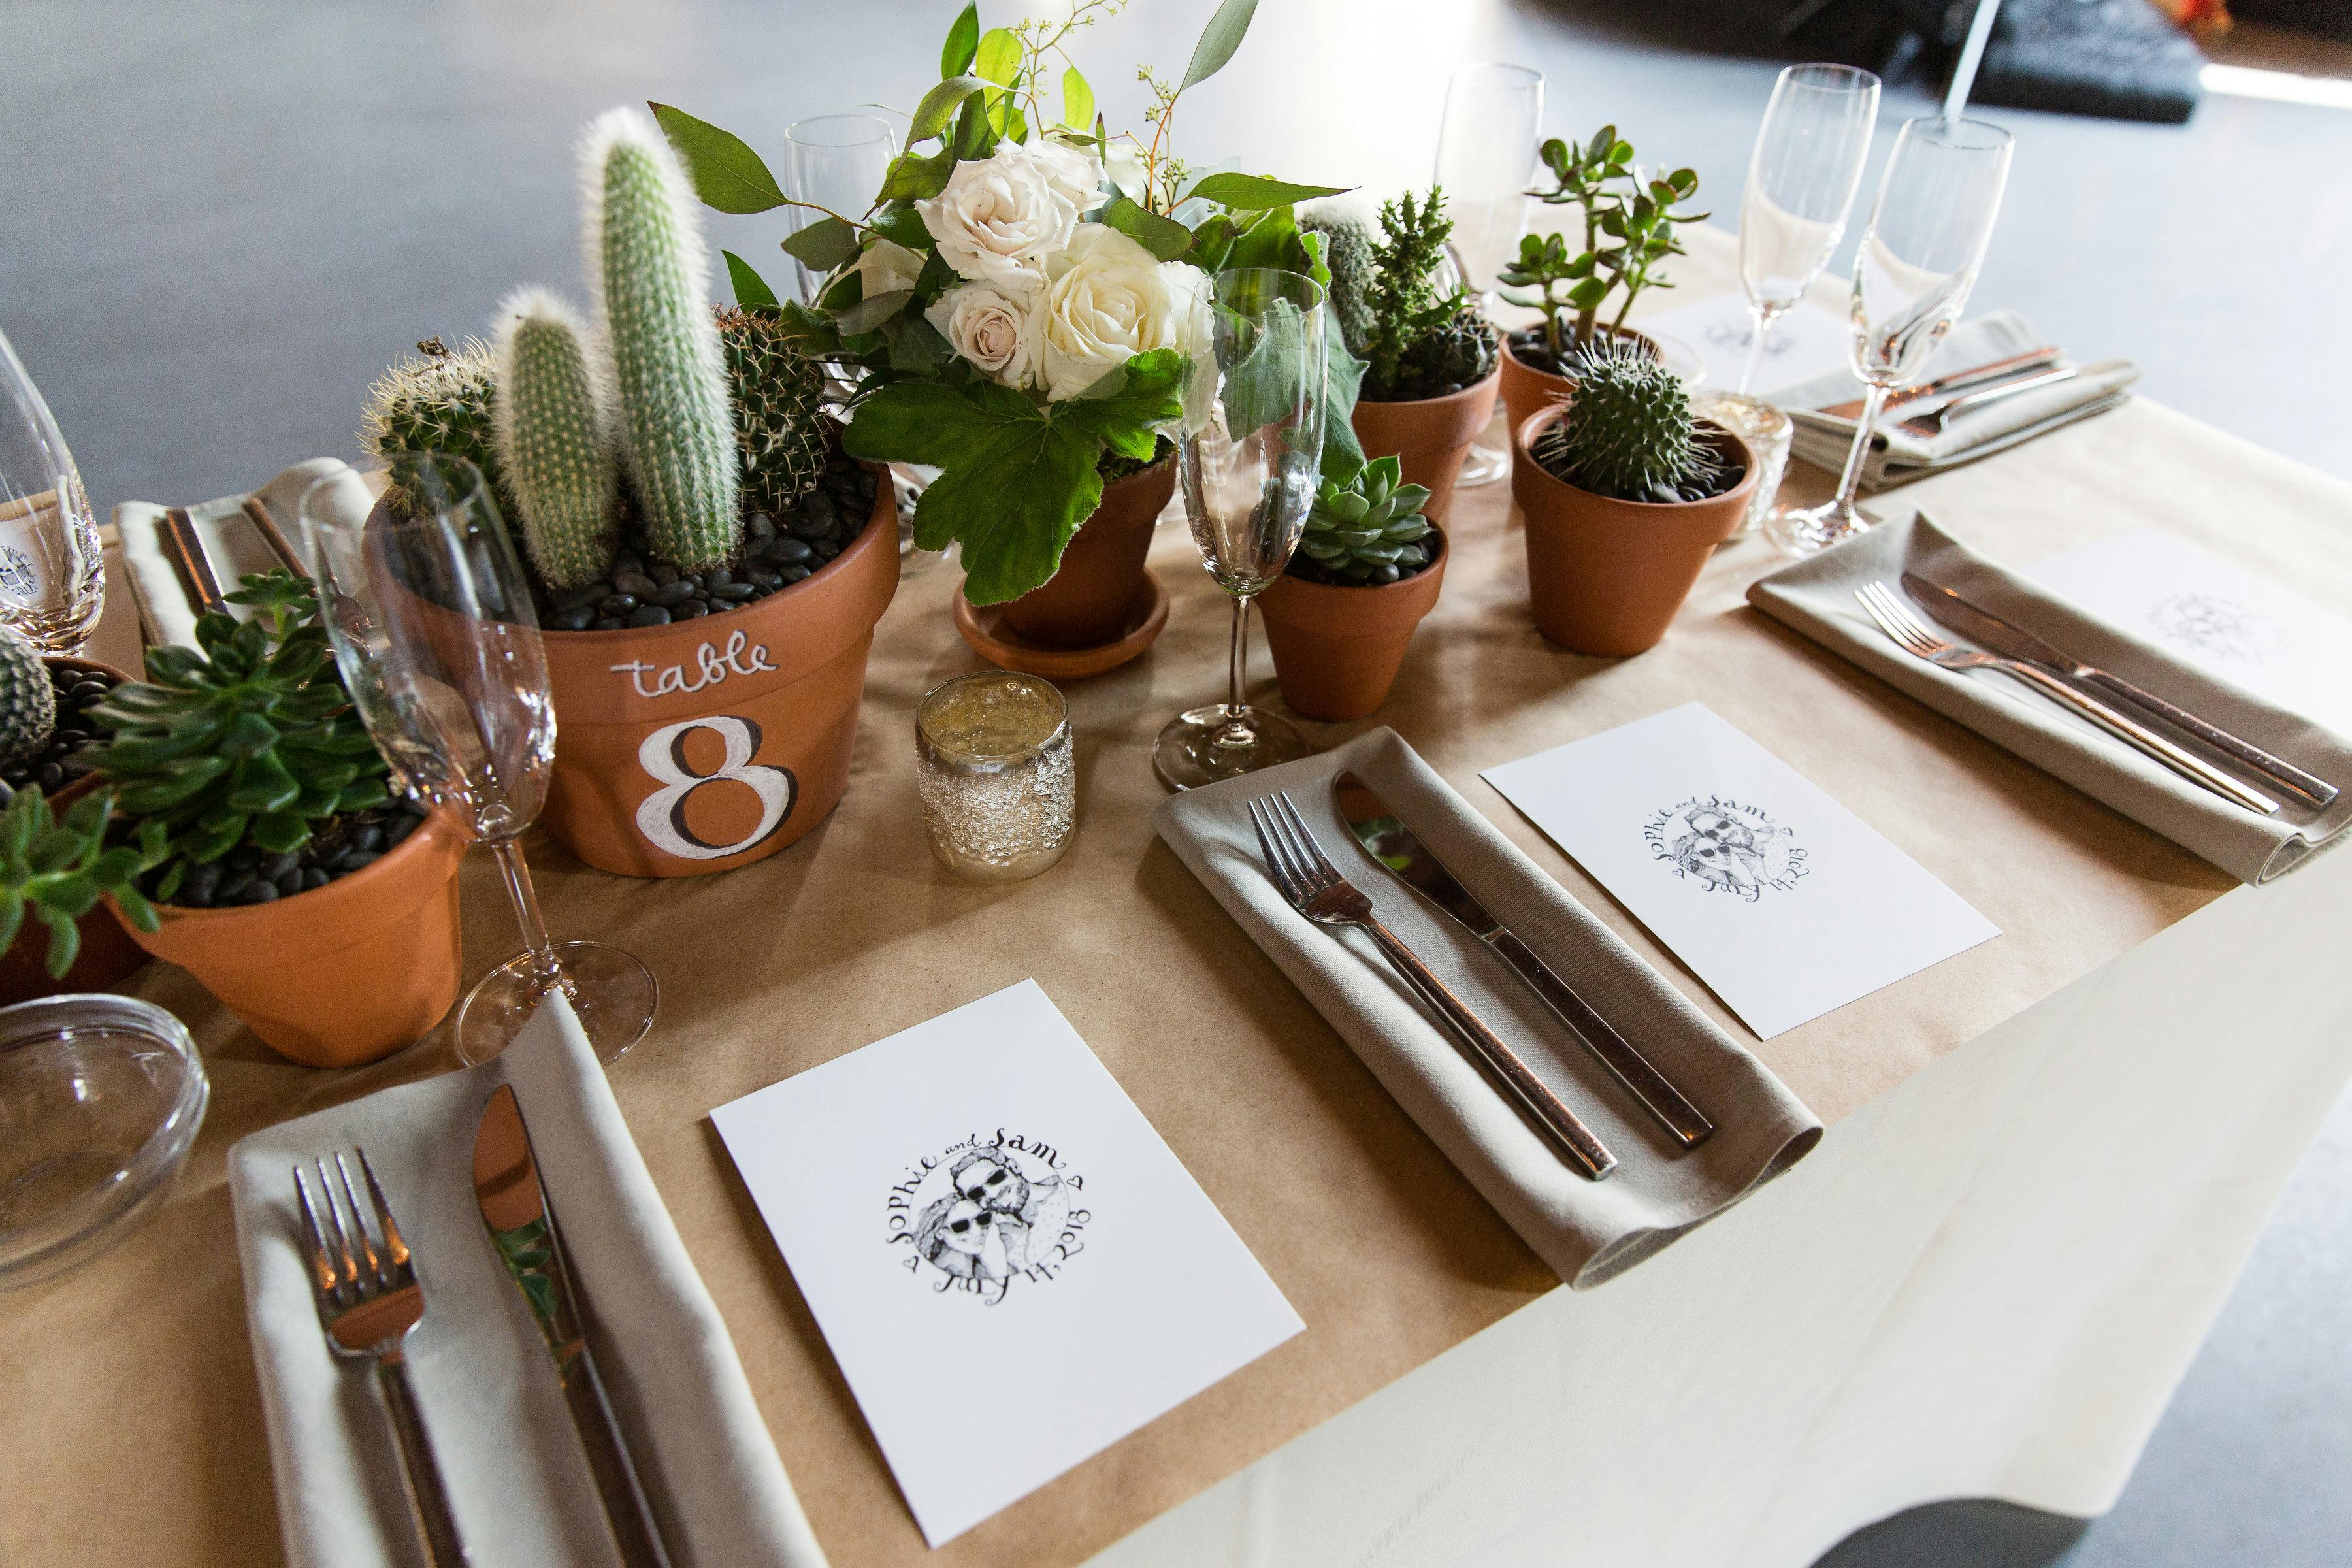 Rustic Desert-Themed Wedding at The Green Building in New York, NY With Cactus Centerpieces